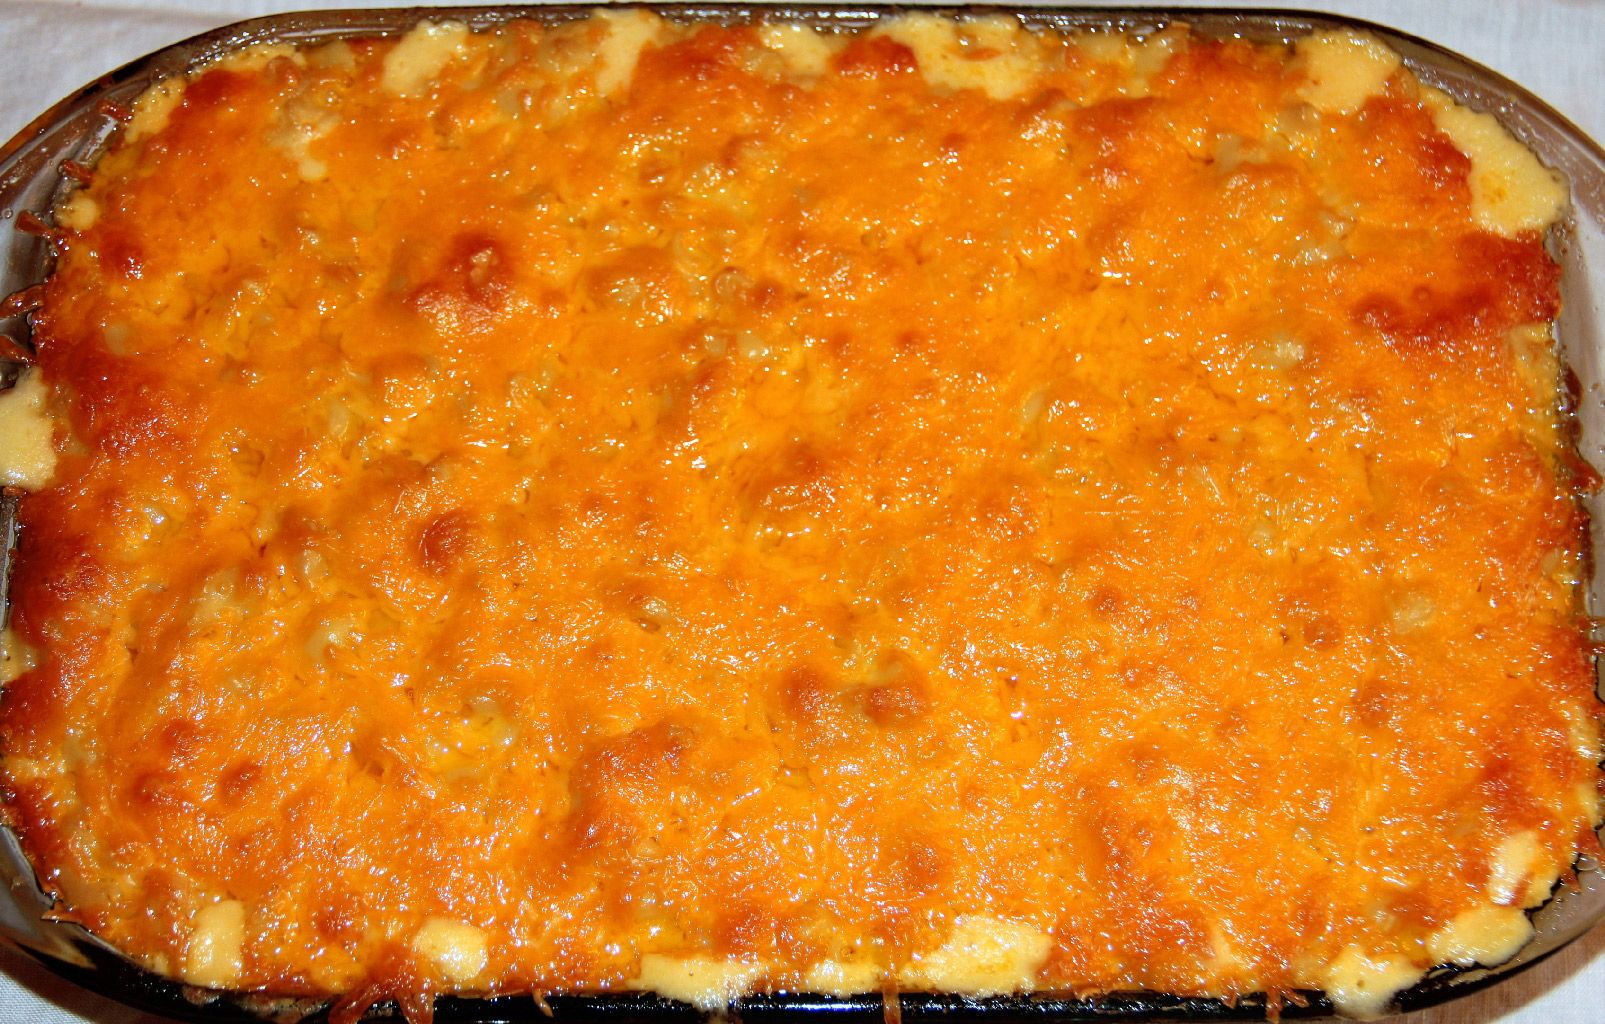 easy baked macaroni and cheese with egg